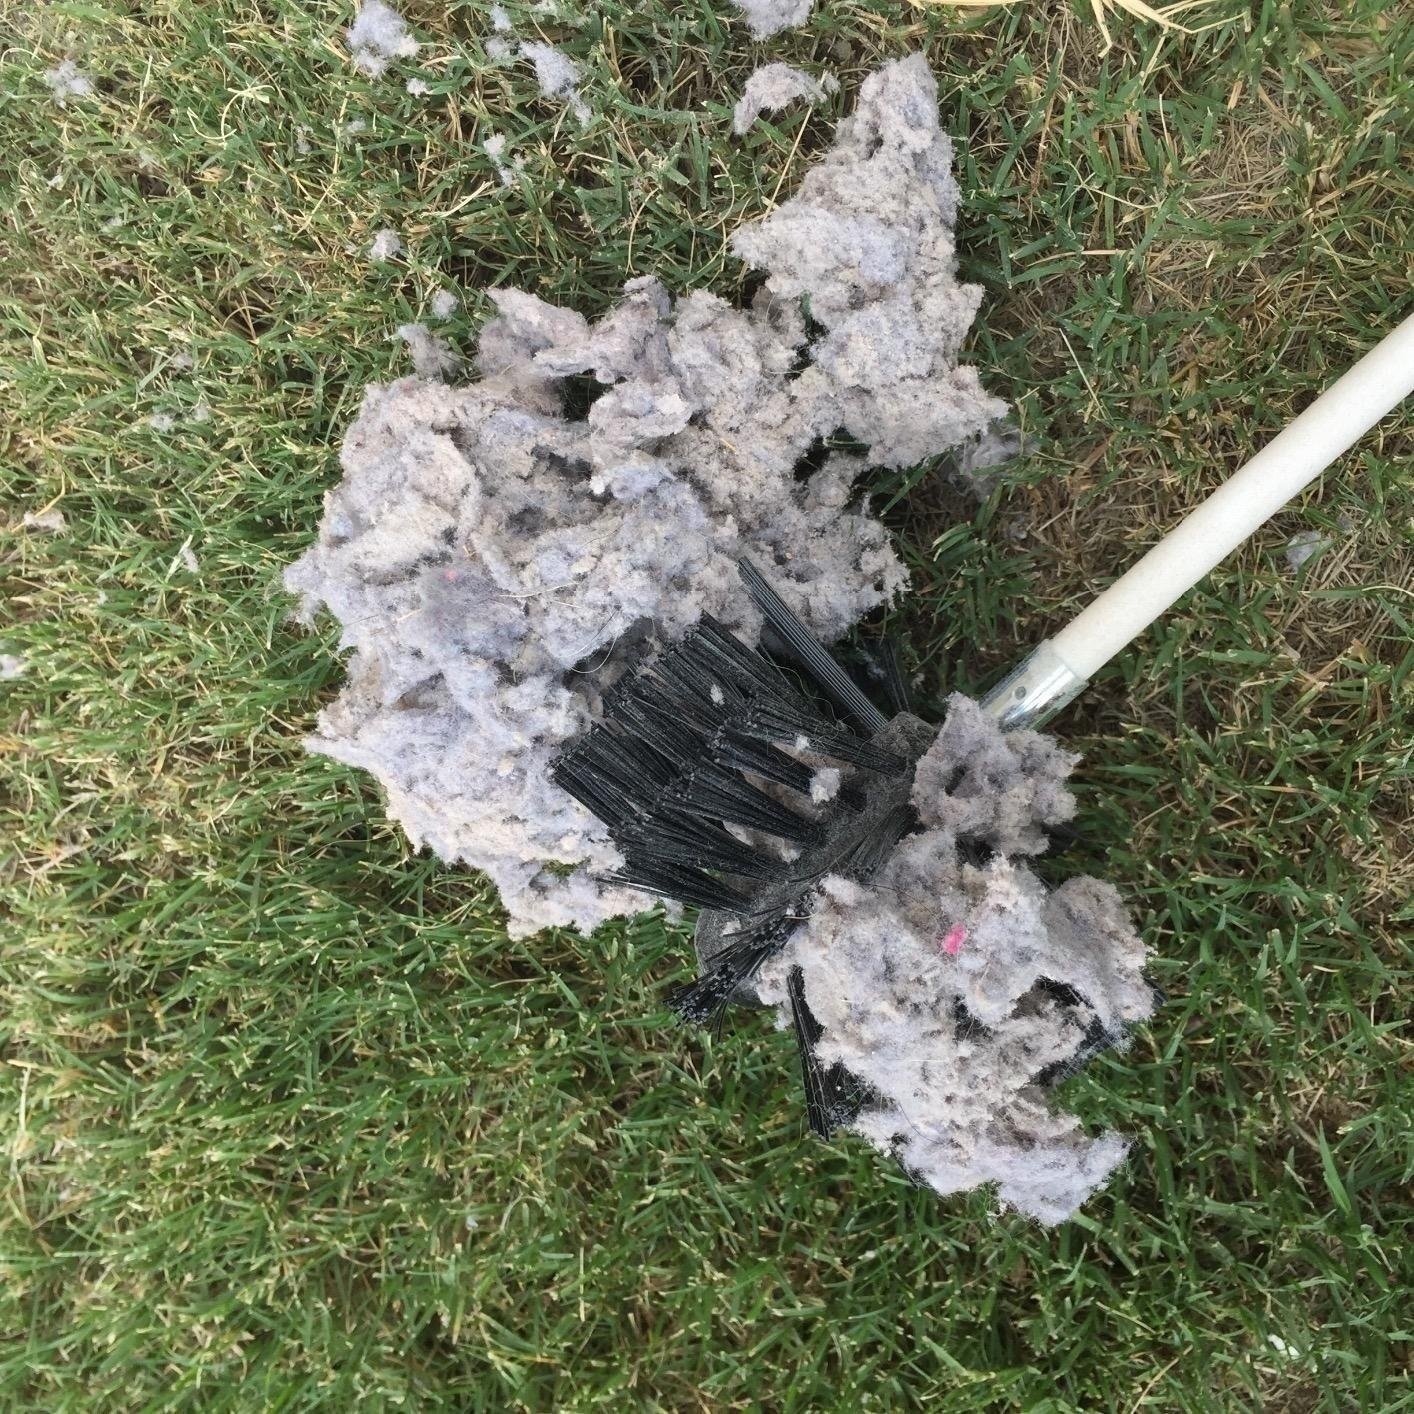 The vent system with a pile of lint collected